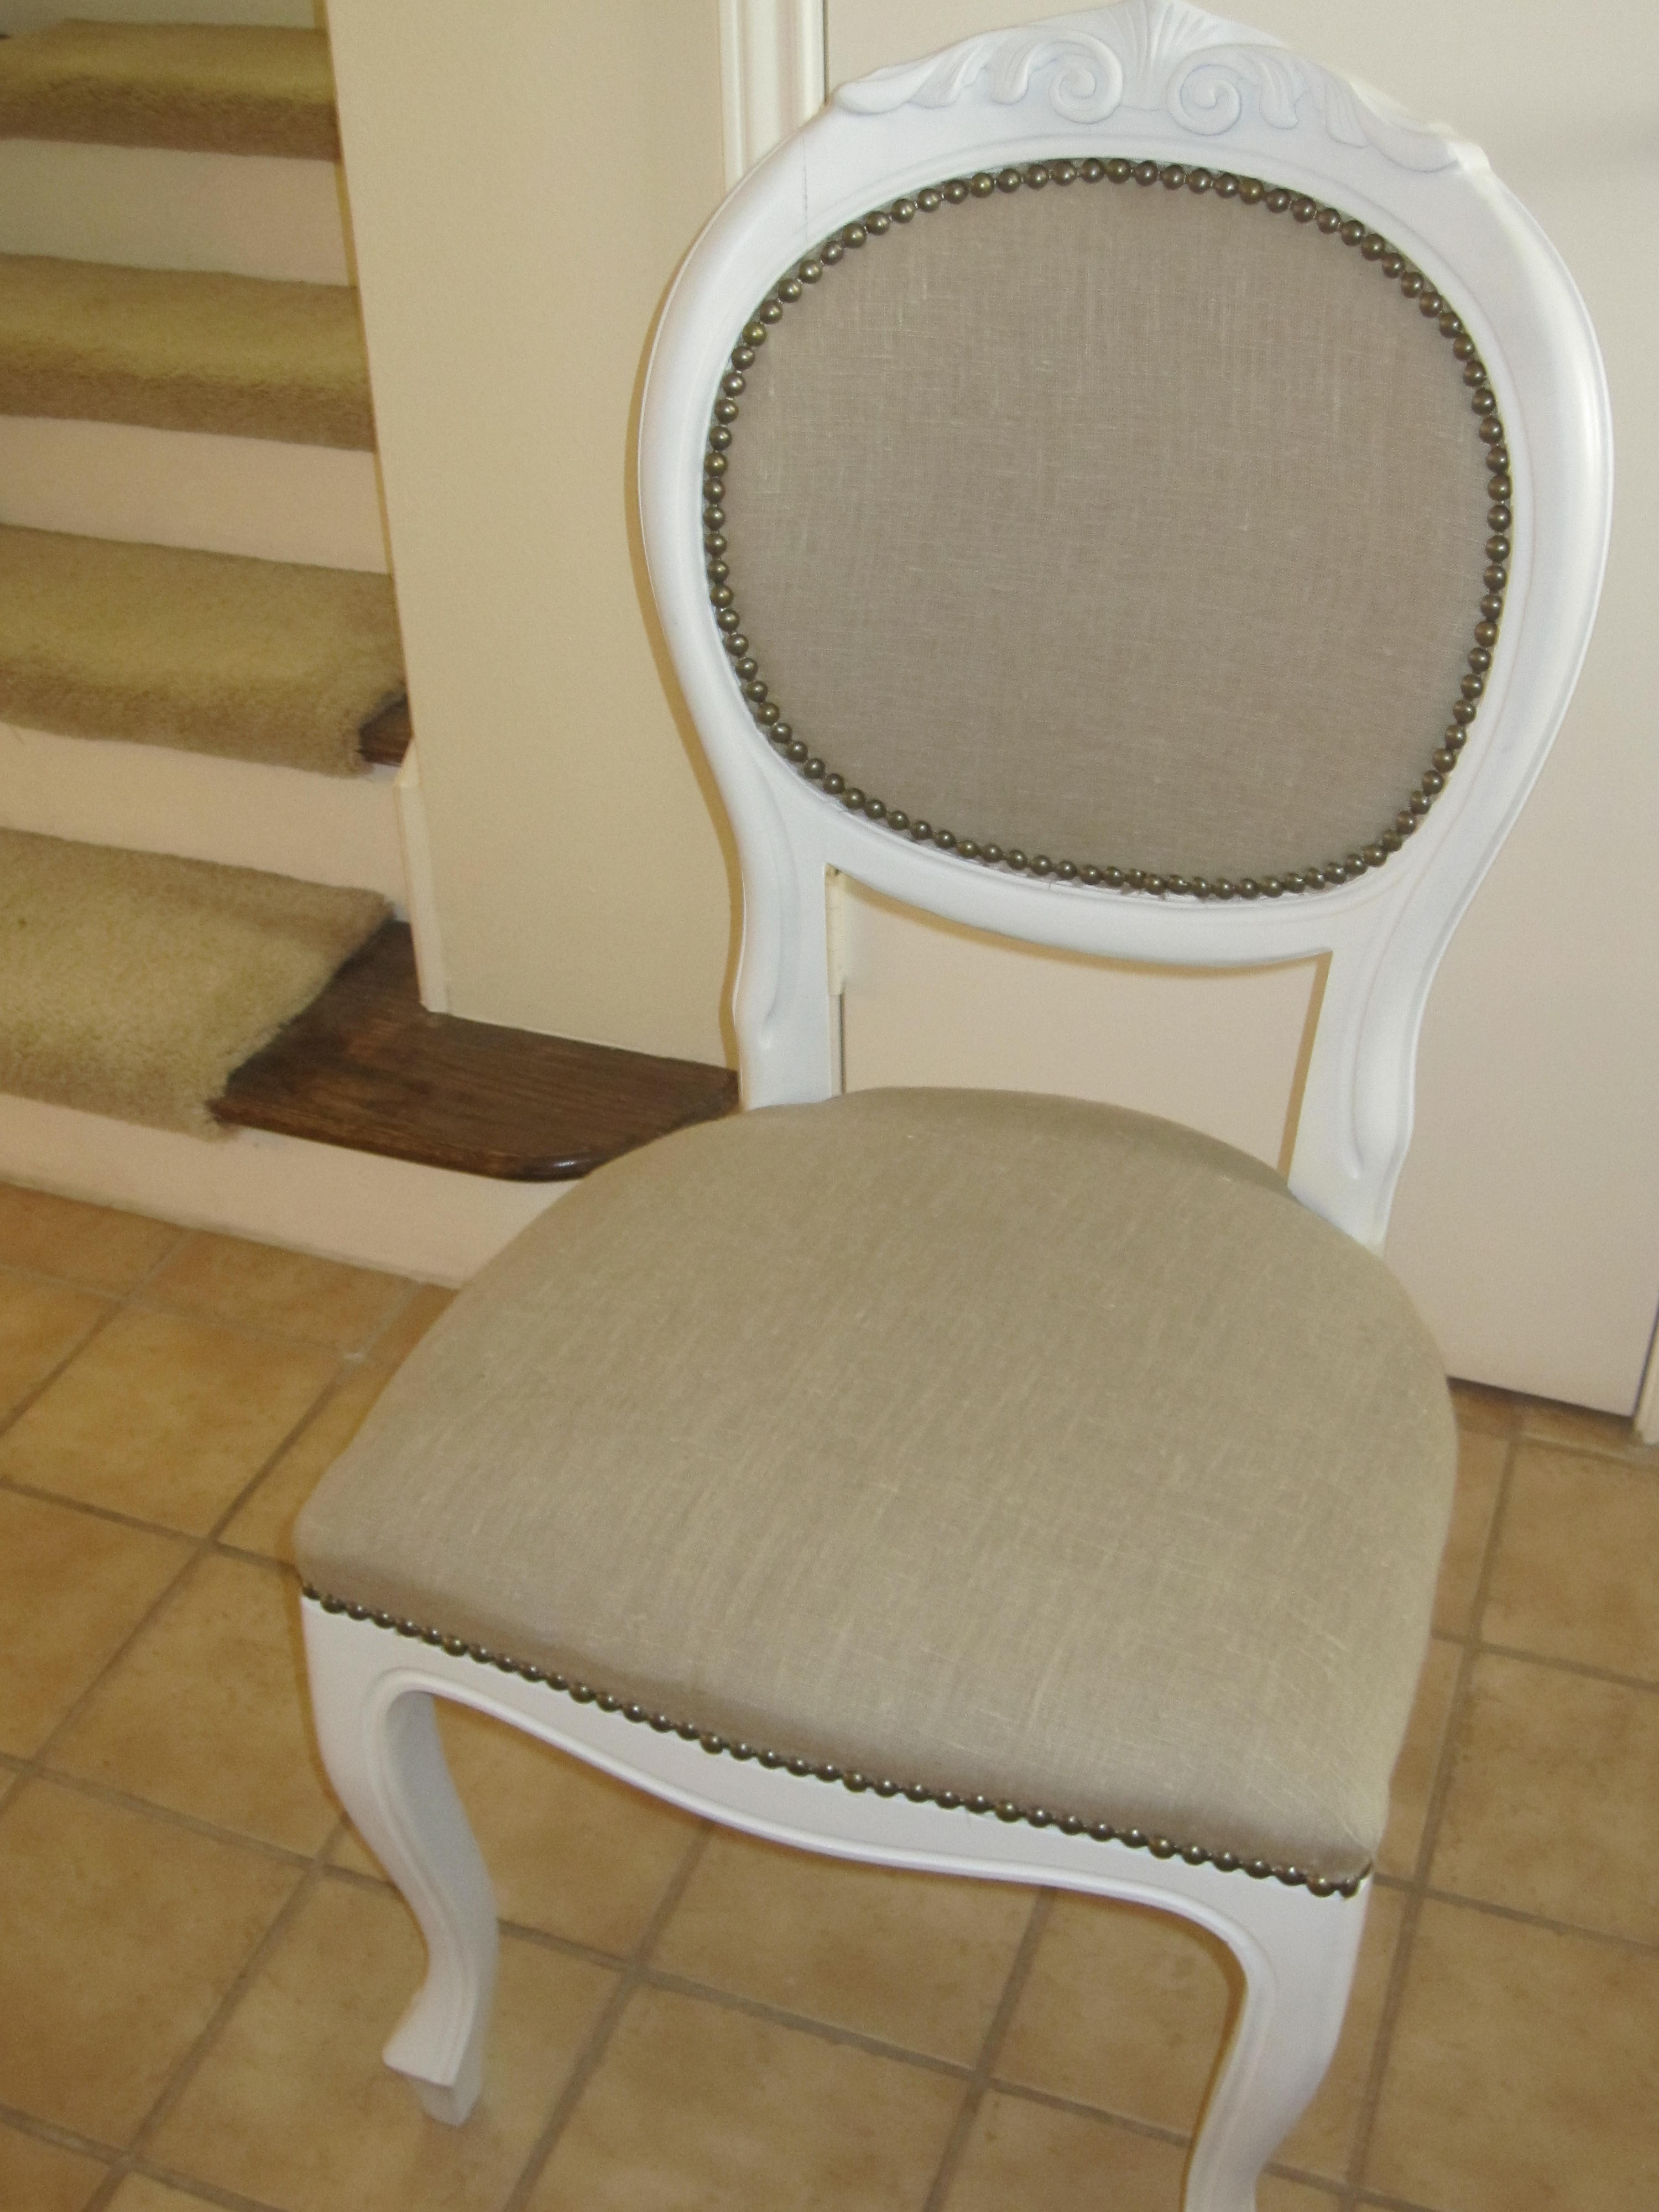 How to Upholster Dining Room Chairs TUTORIAL {and a sneak peak at